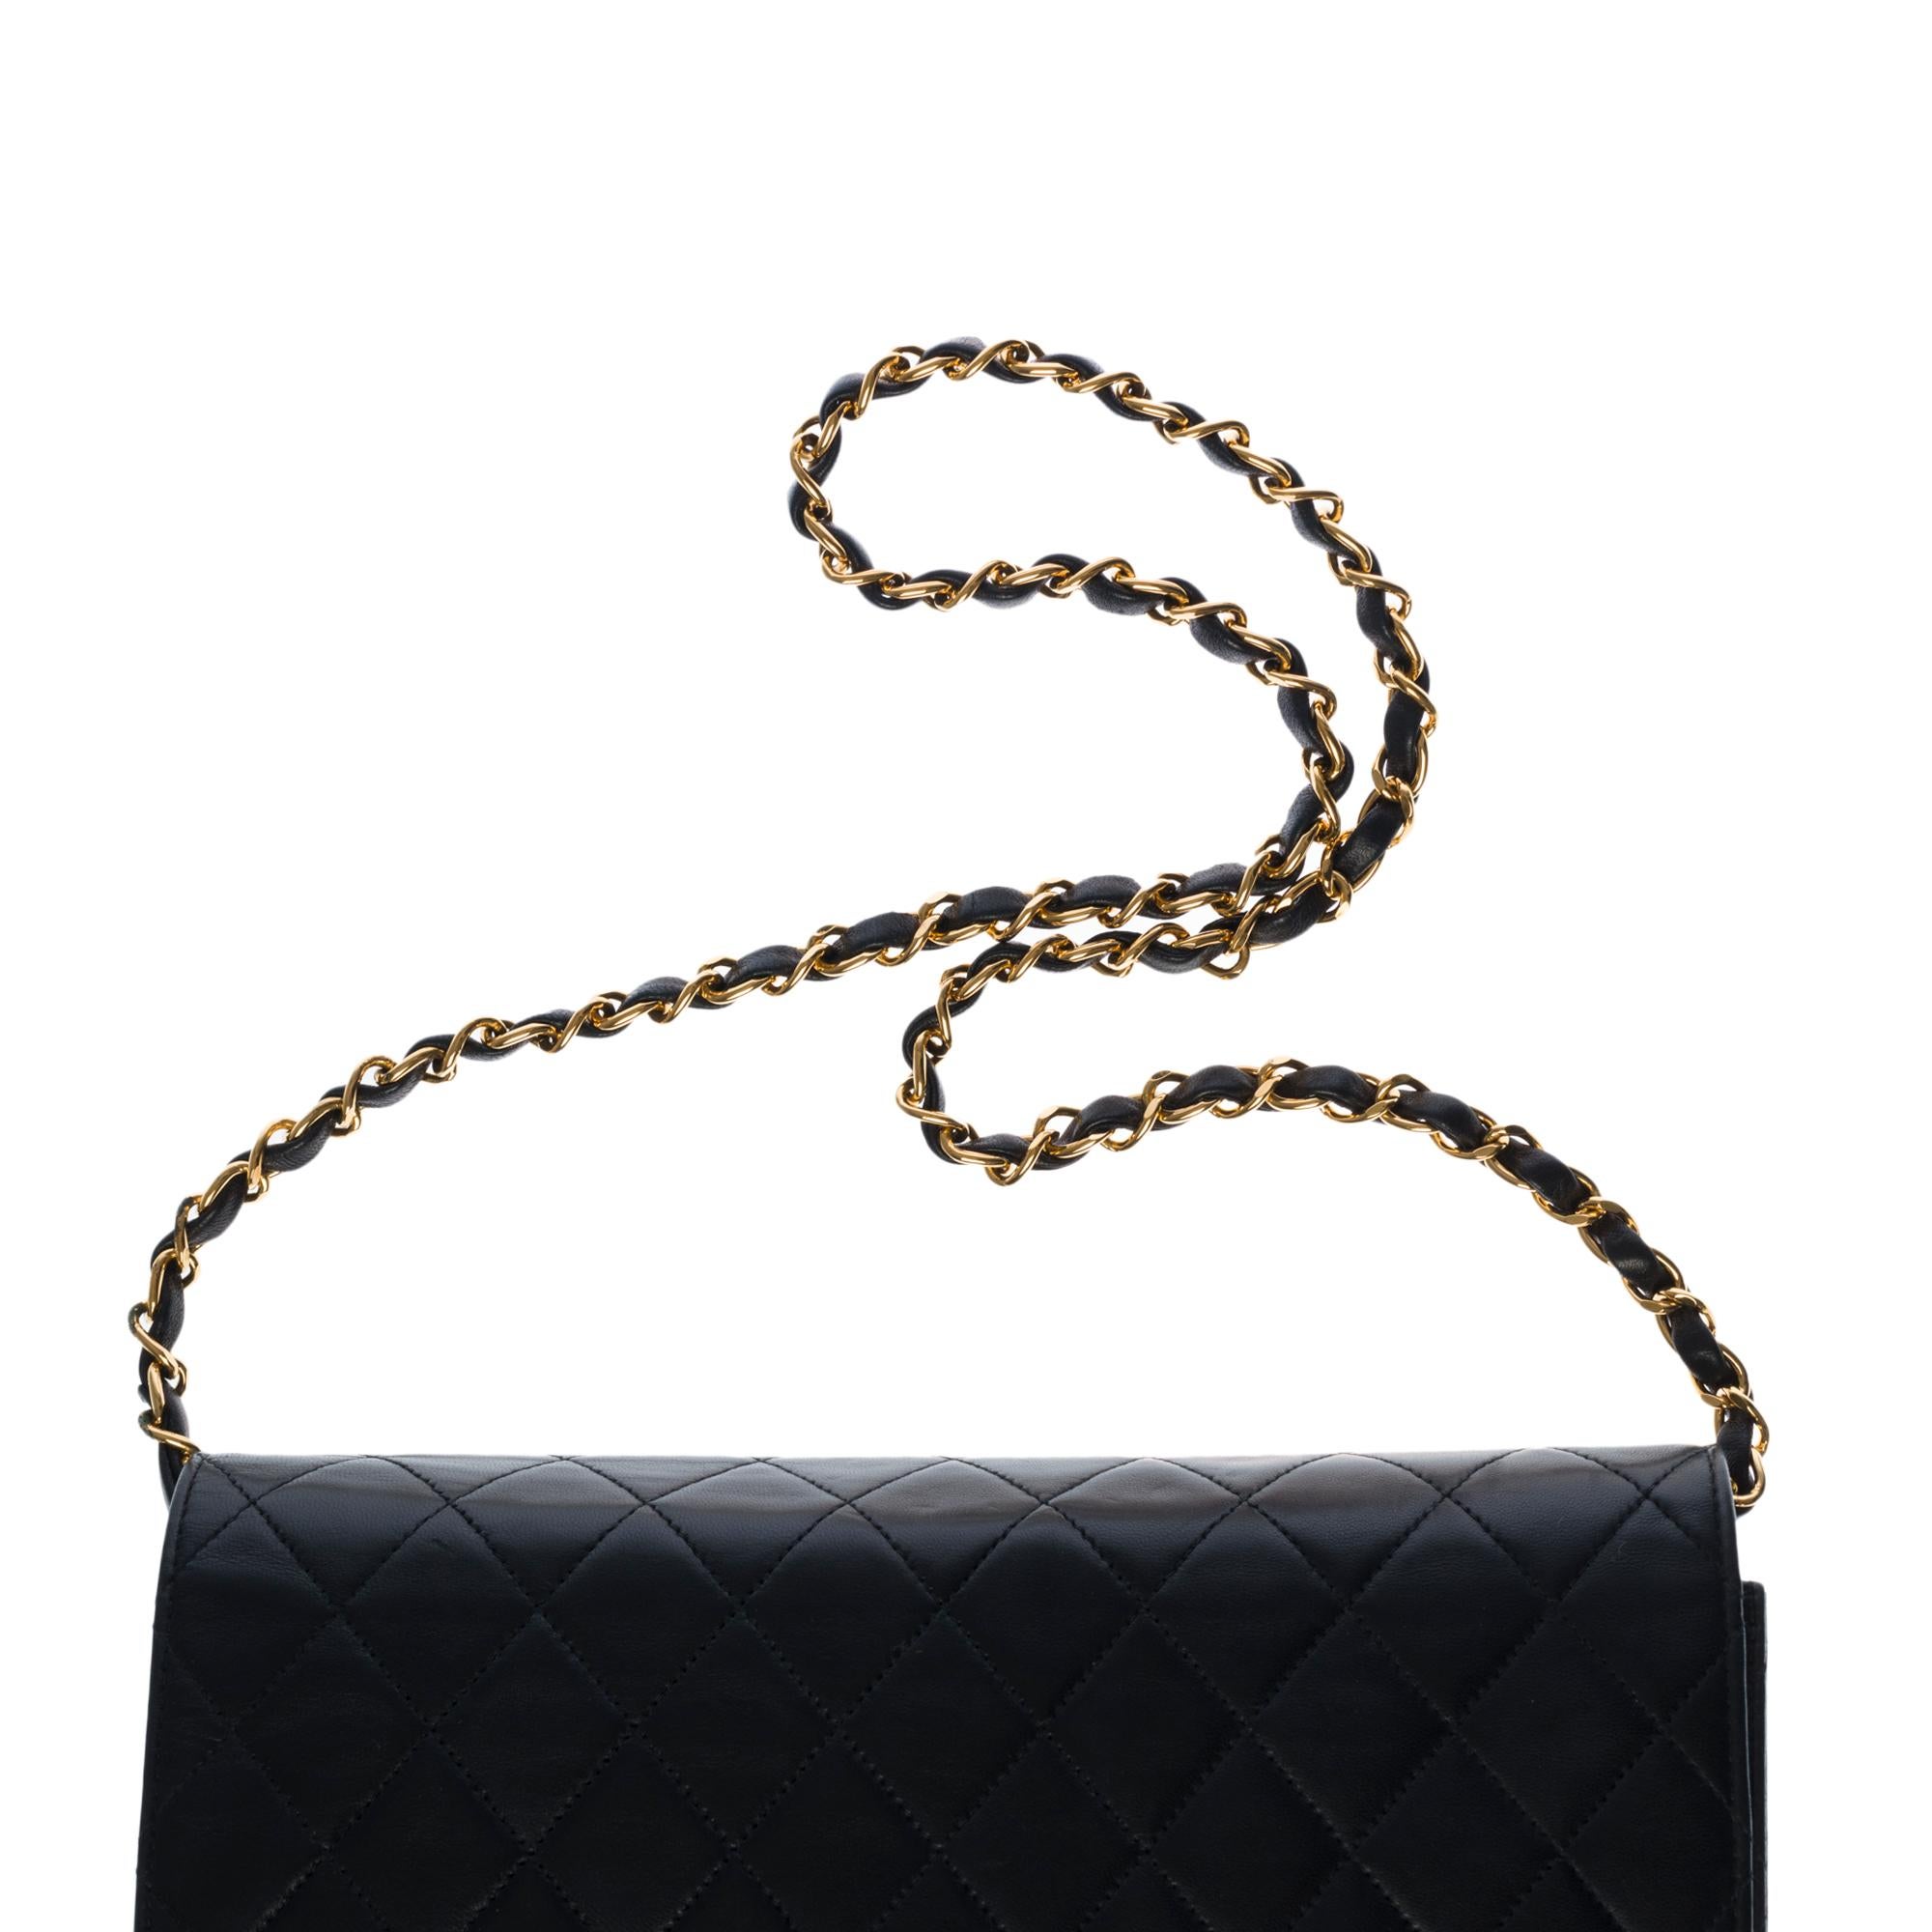 Chanel Classic Flap bag shoulder bag in black quilted lambskin and gold hardware 3